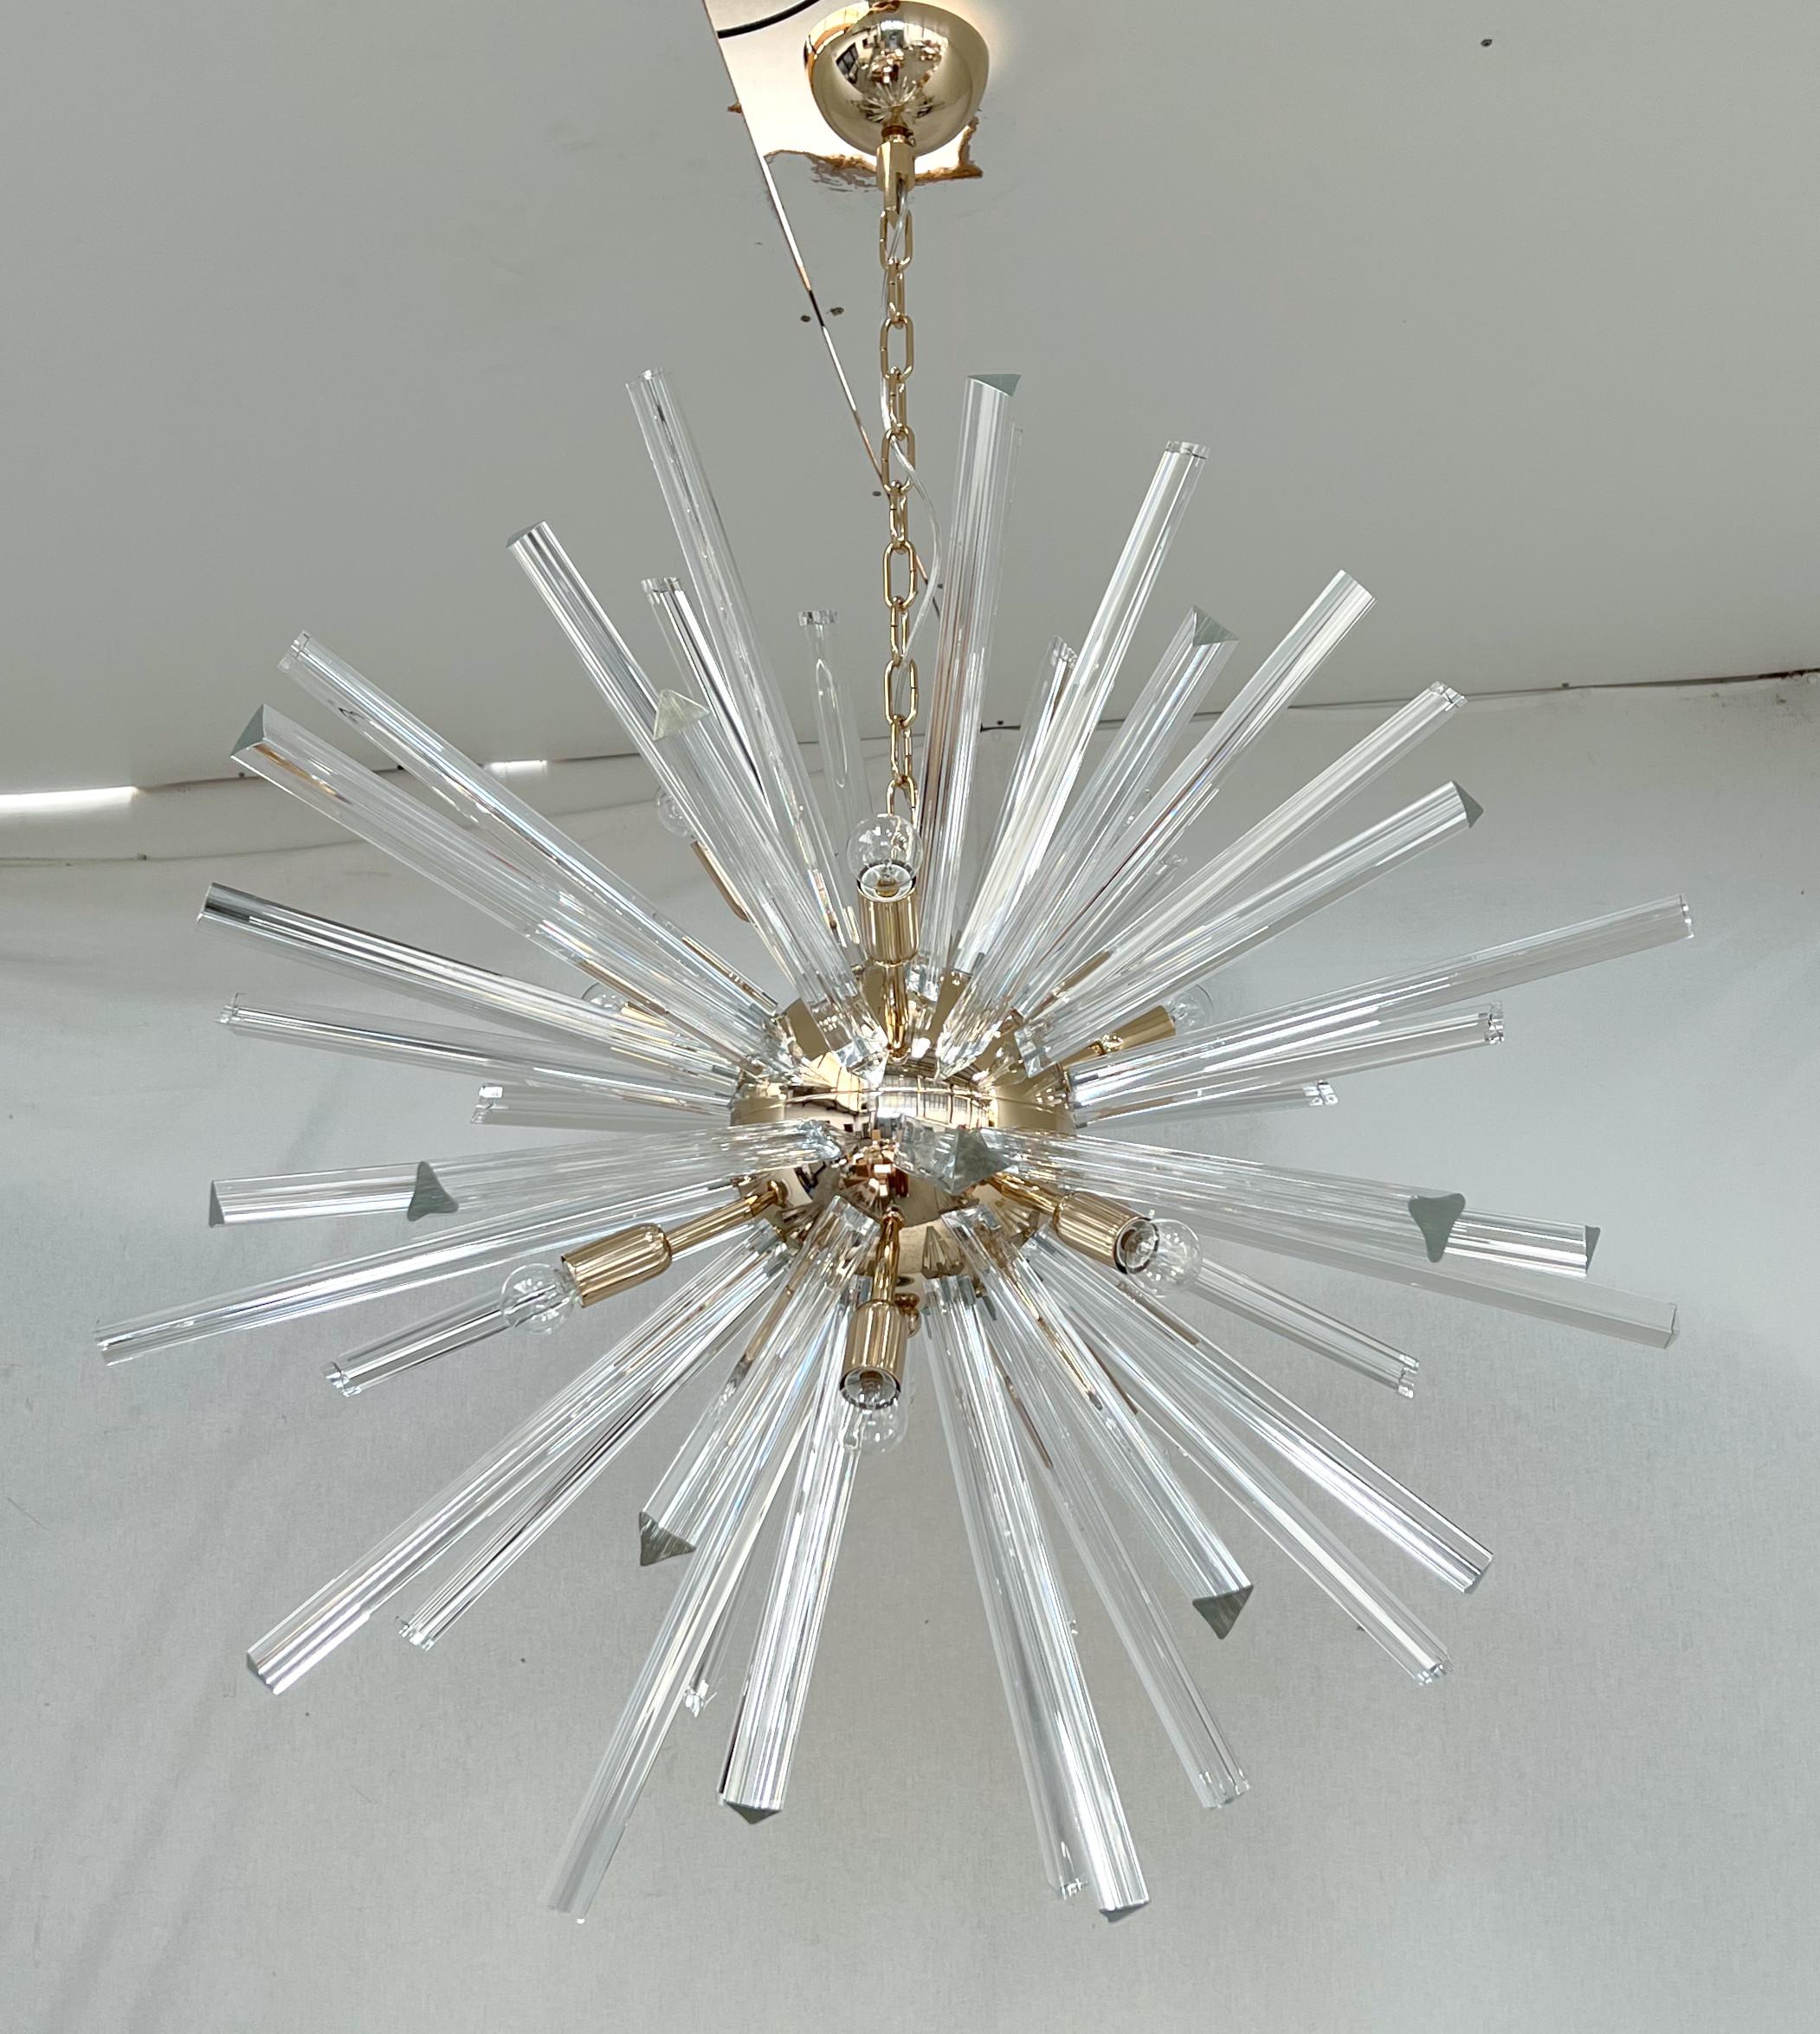 Italian sputnik chandelier with Murano glasses hand blown into three points using Triedri technique, mounted on 24-karat gold-plated frame / inspired by Venini / Made in Italy
12 lights / E12 or E14 type / max 40W each
Measures: Diameter 35.5 inches